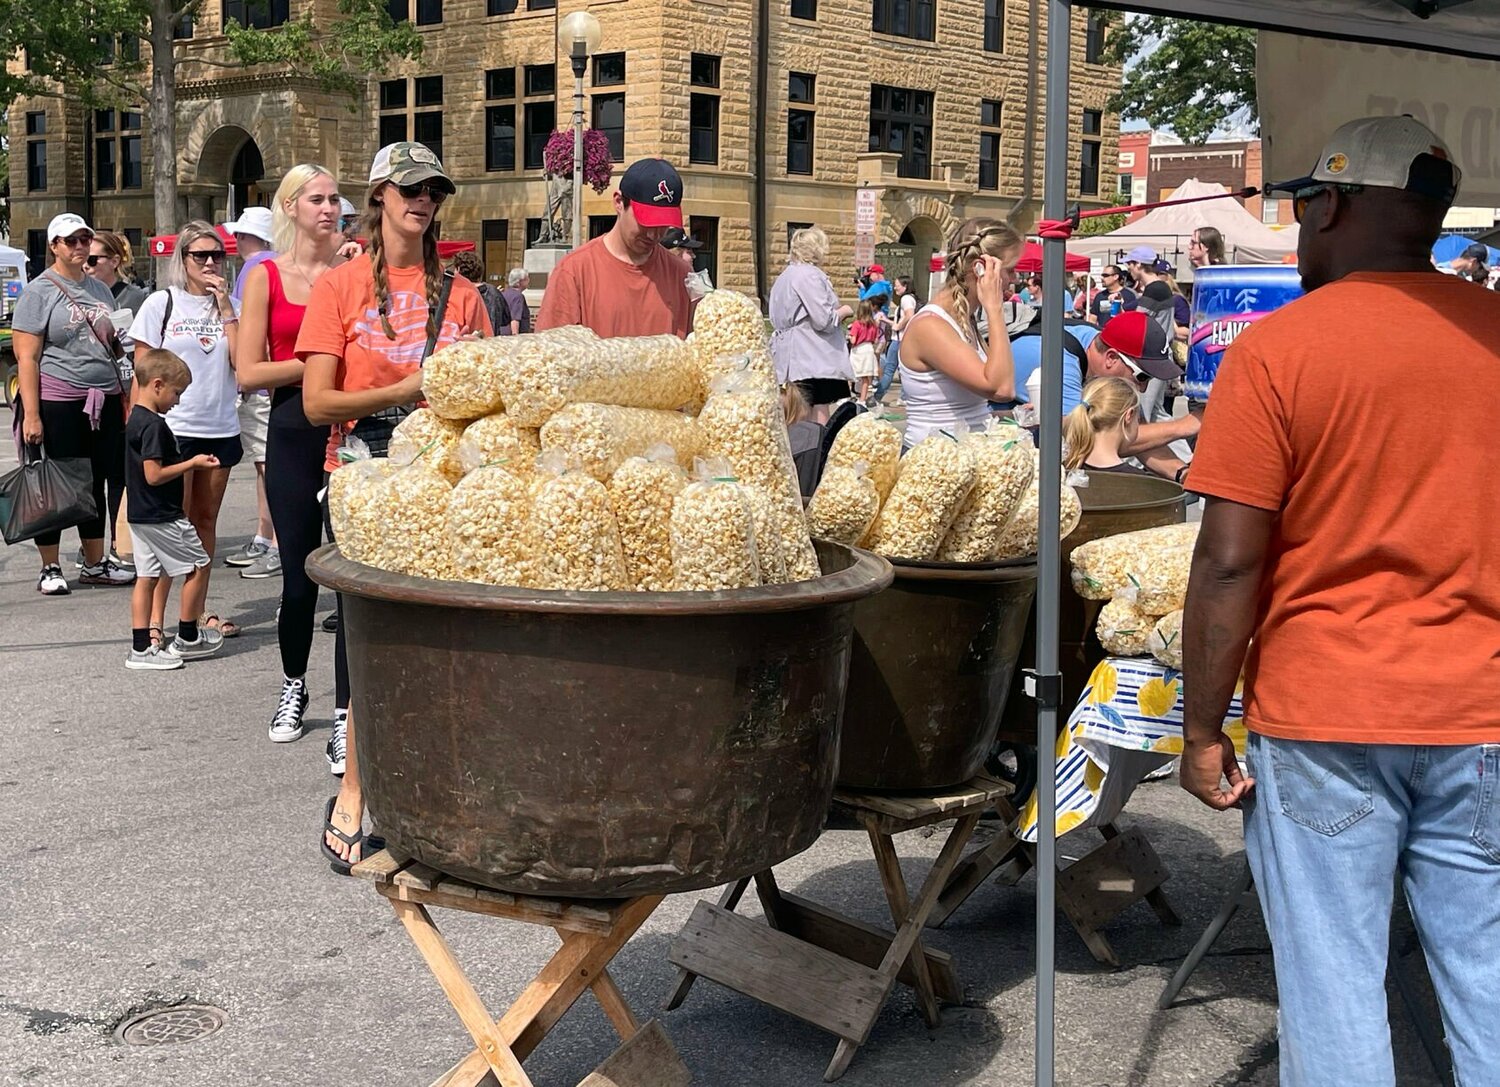 People line up to buy fresh made popcorn at the Red Barn Arts and Crafts Festival.